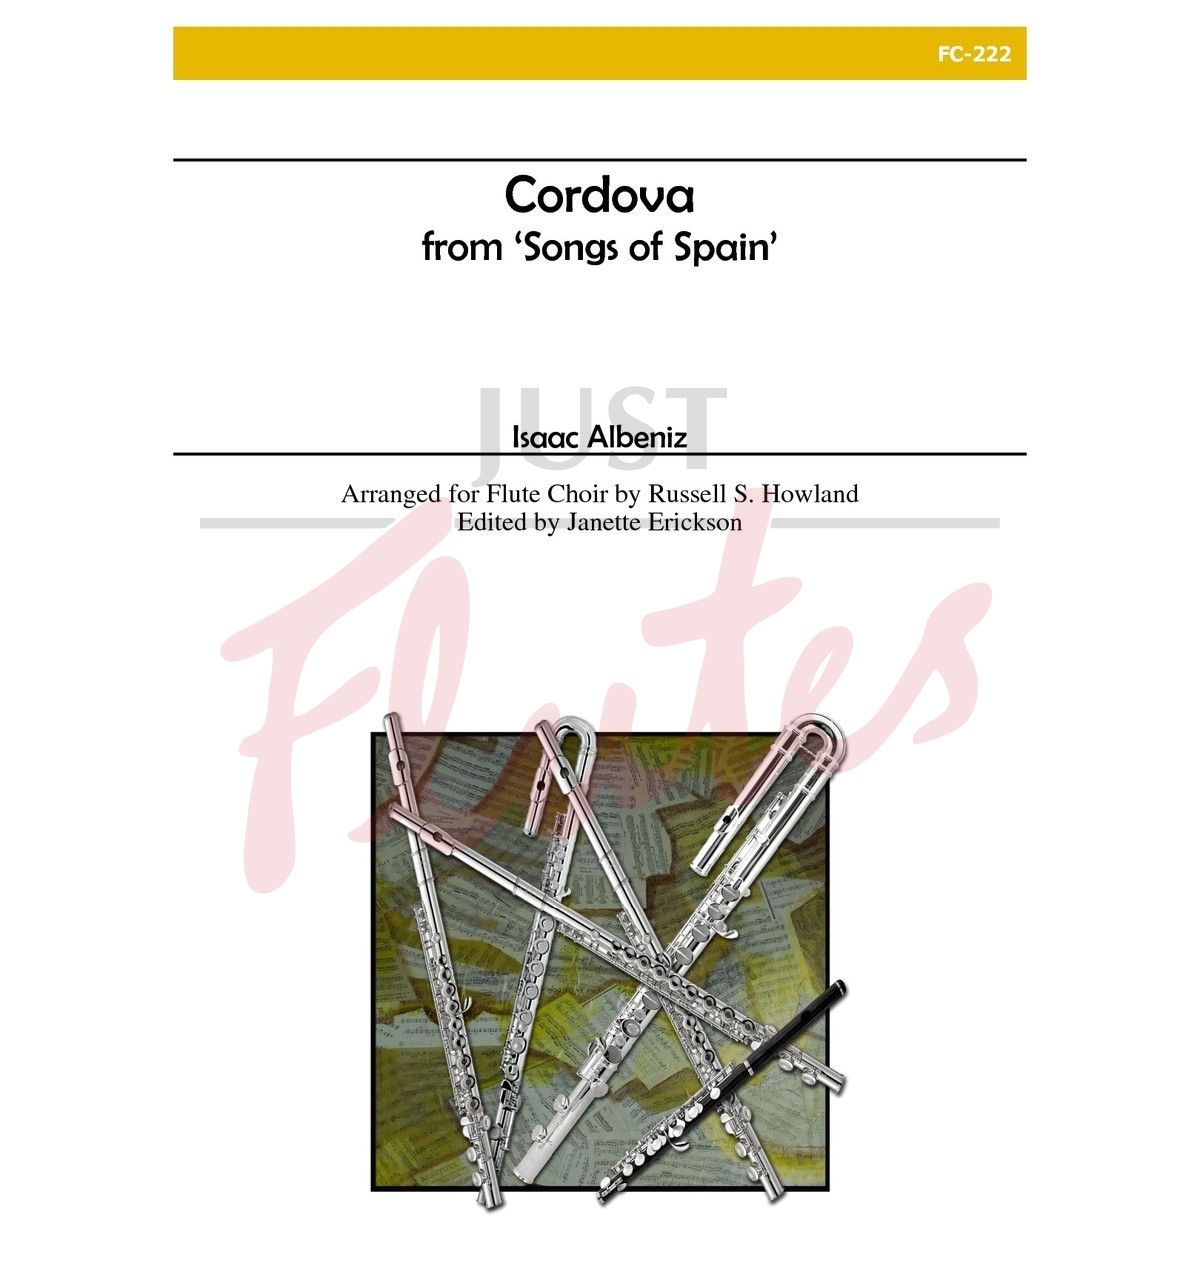 Cordova from Songs of Spain